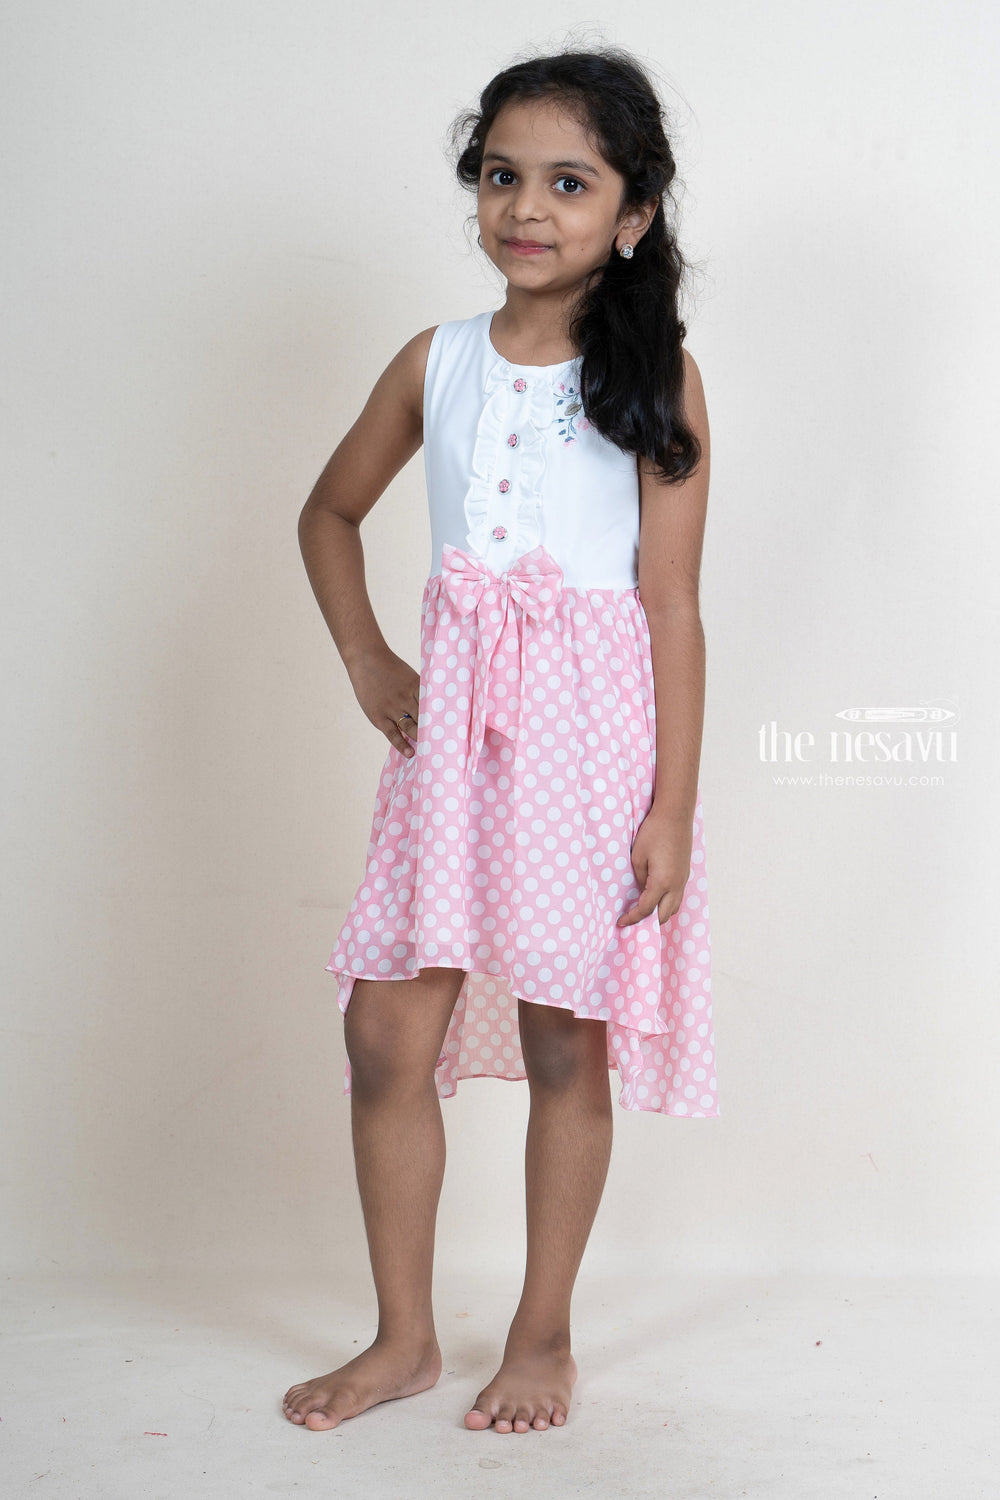 The Nesavu Frocks & Dresses Pink with white polka dotted embroidery embellished crepe cotton gown for girls psr silks Nesavu